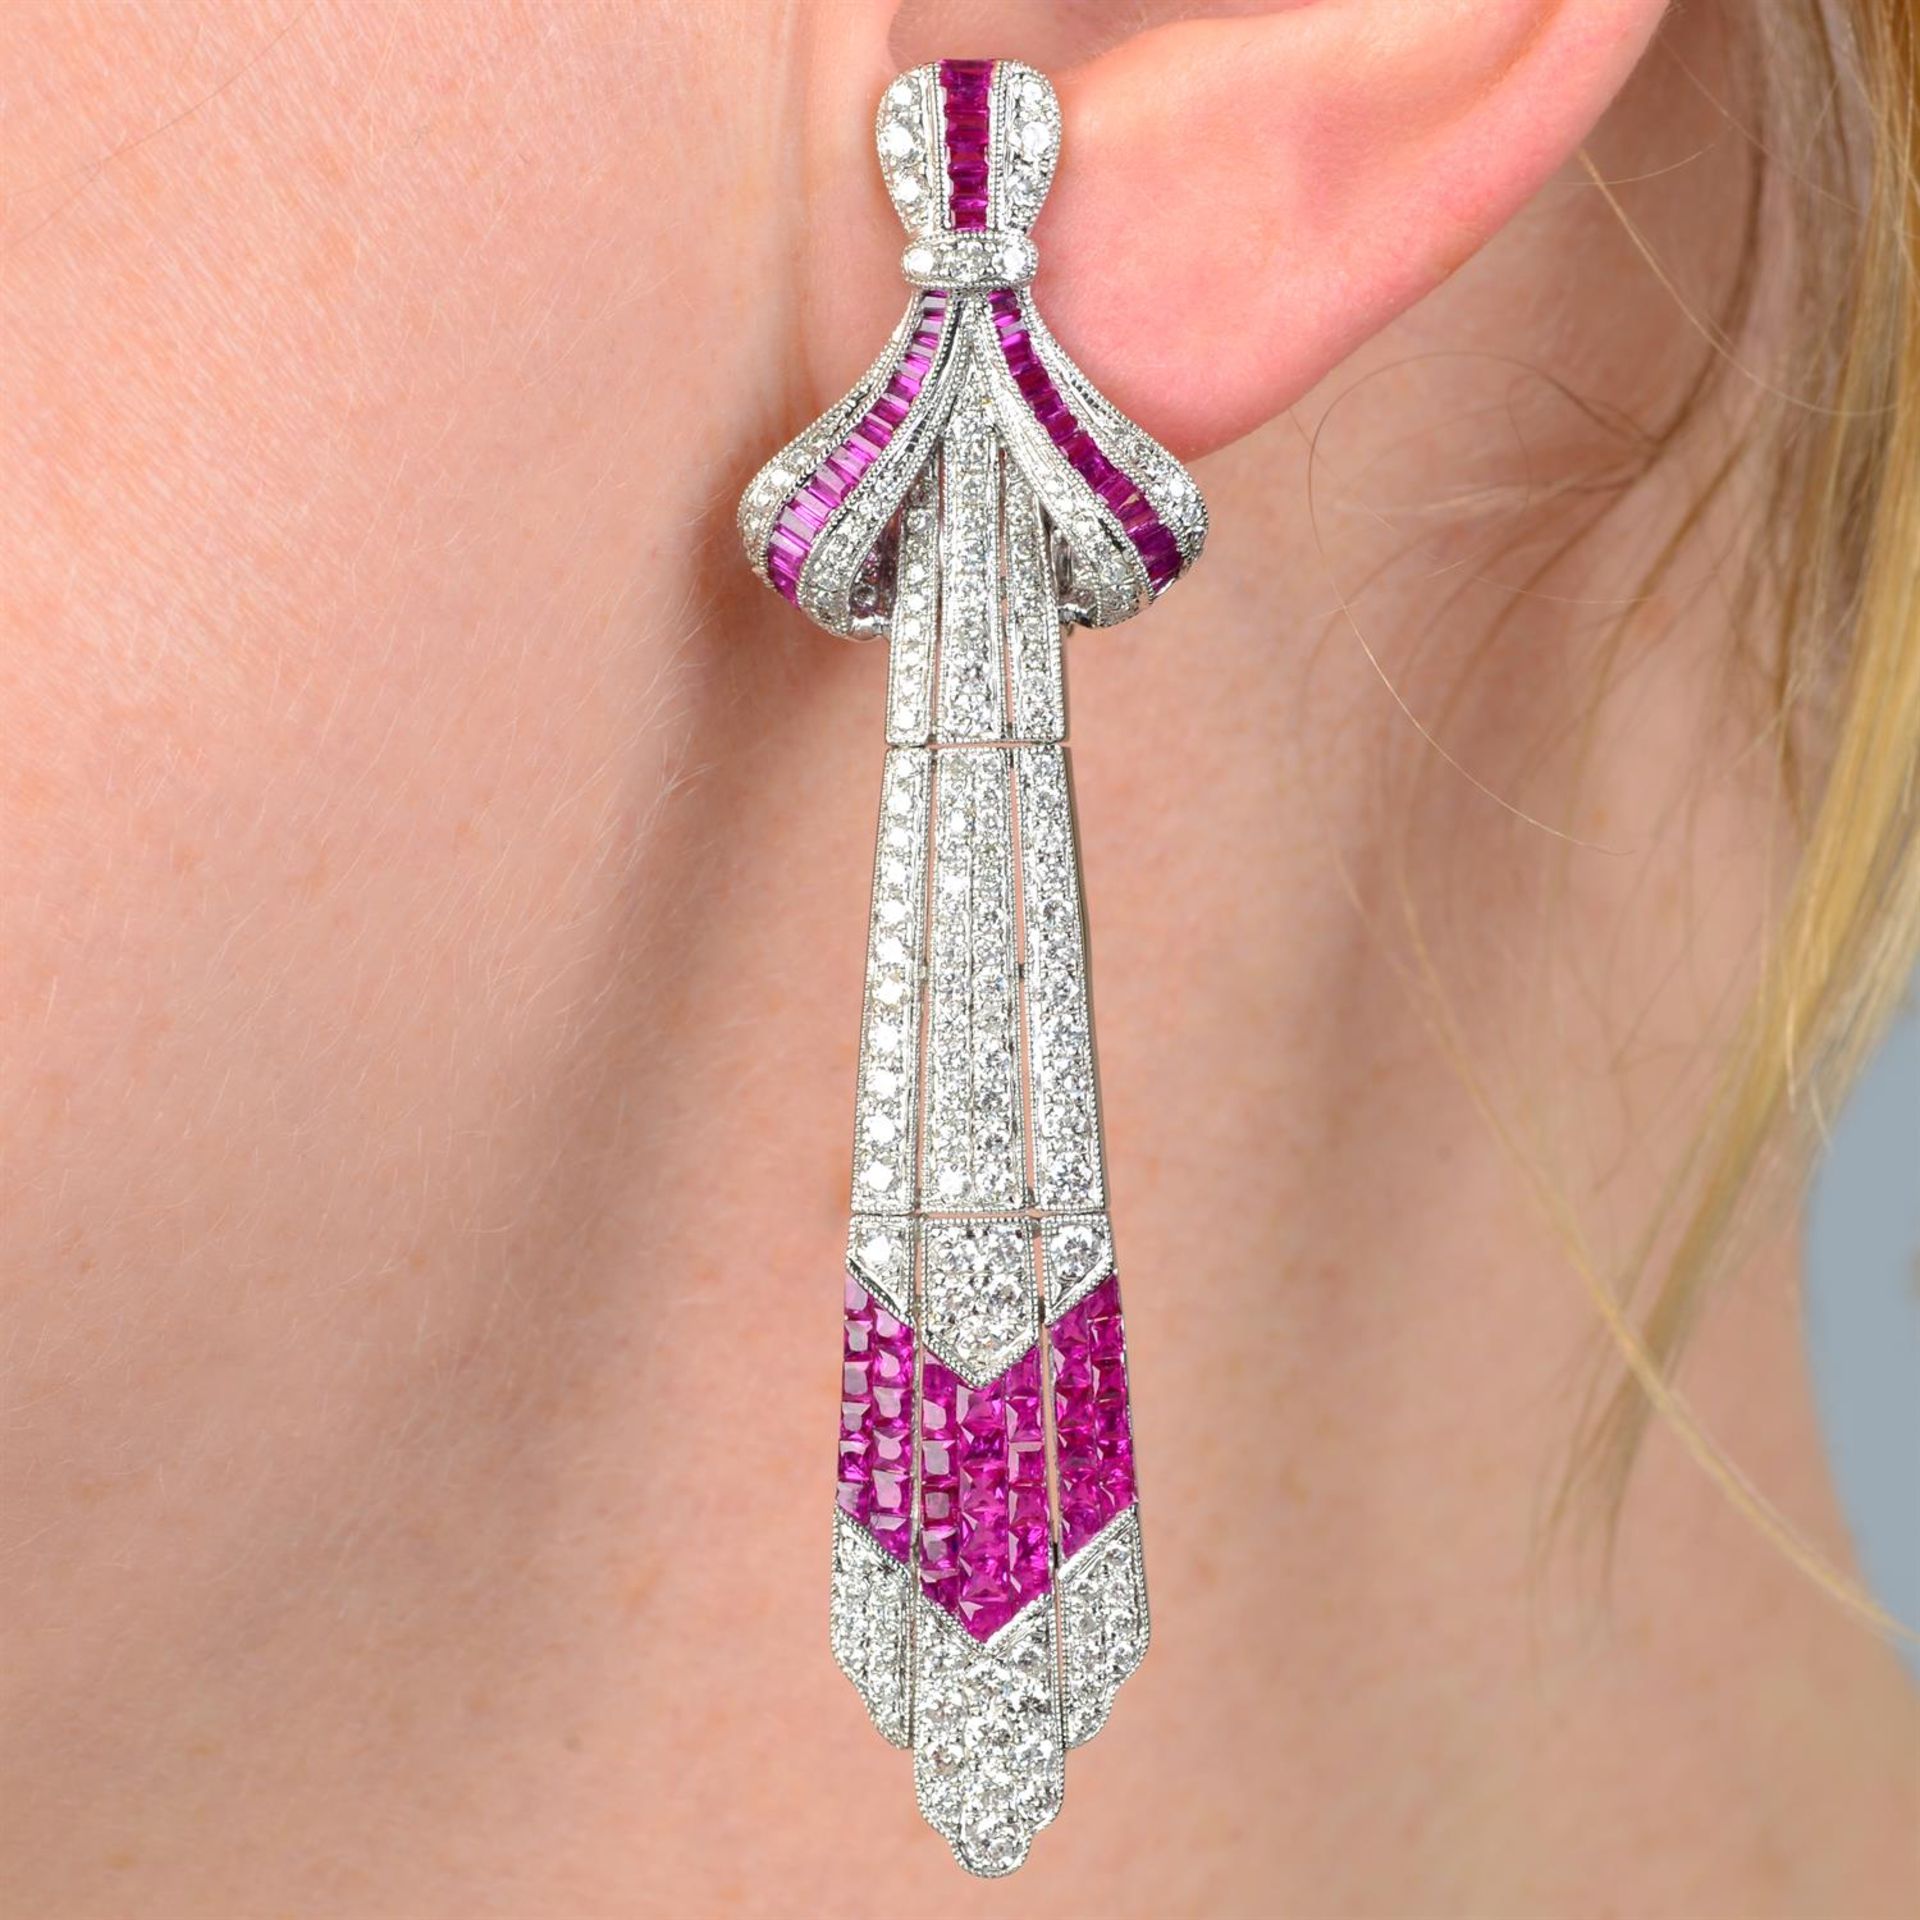 A pair of diamond and ruby earrings.